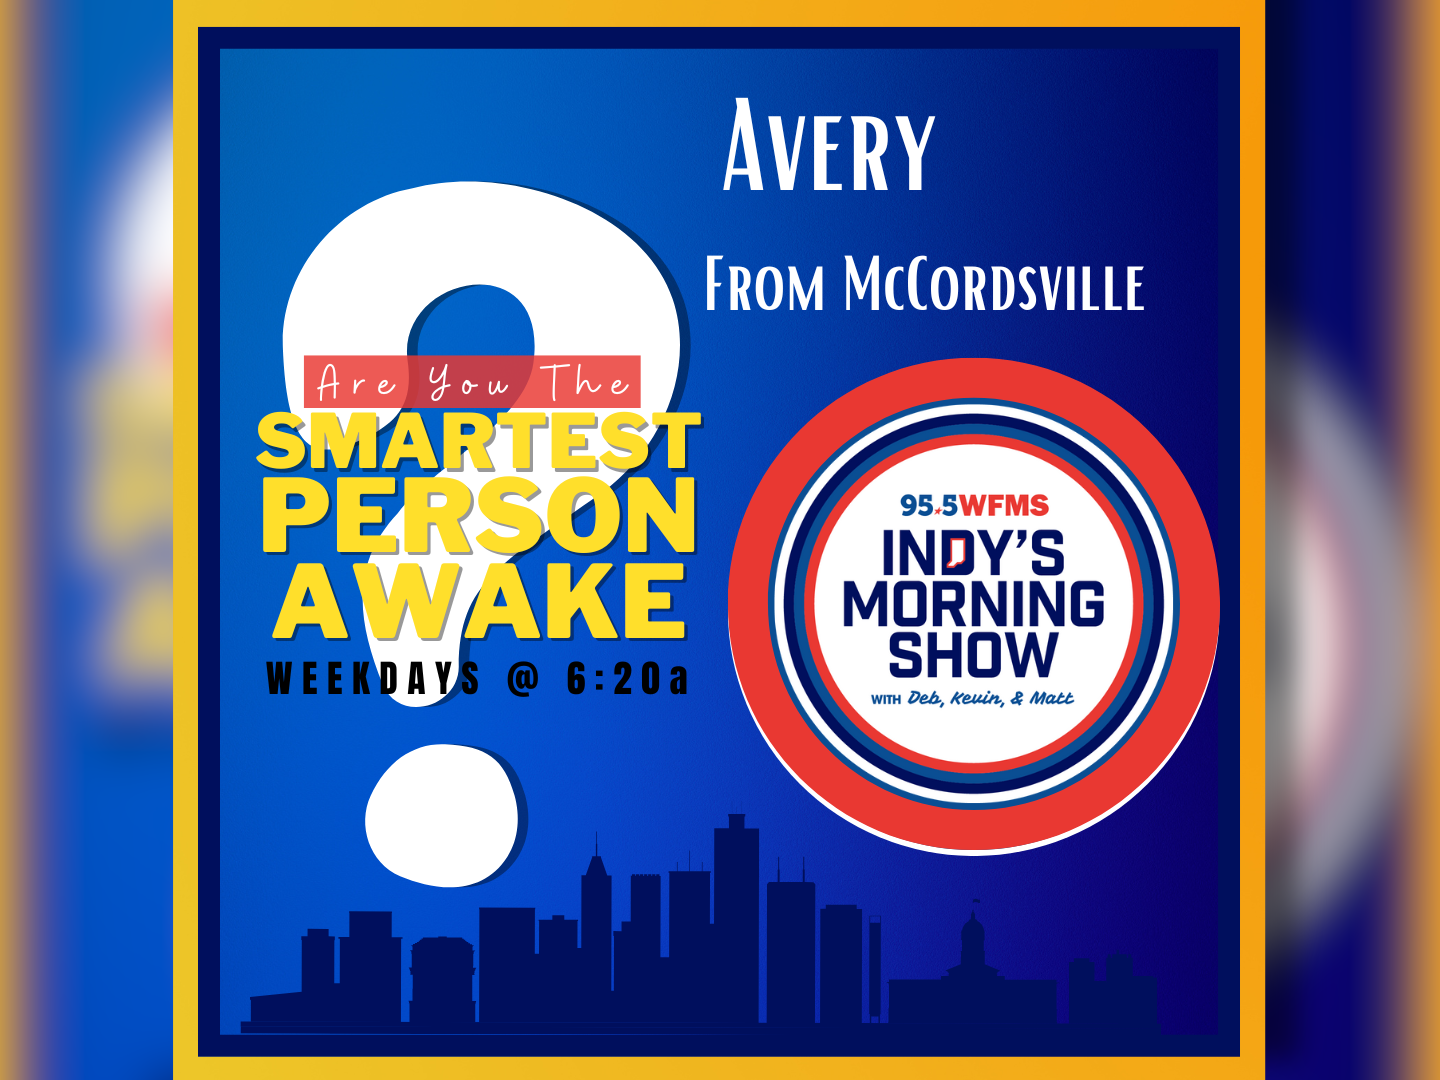 Avery from McCordsville was the Smartest Person Awake